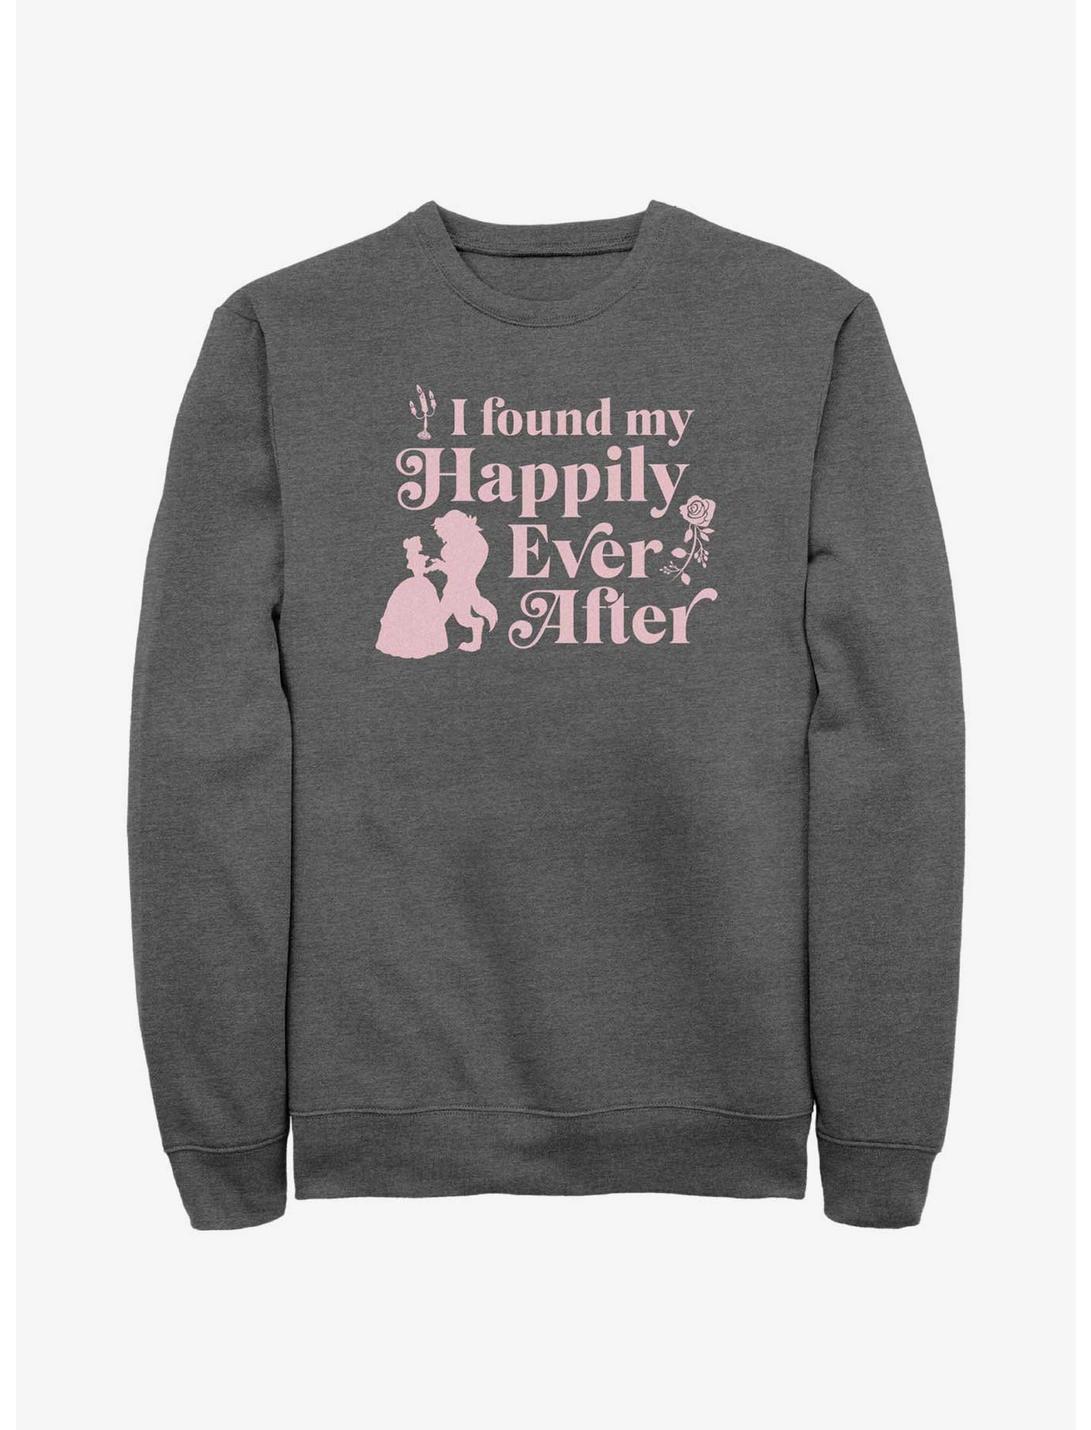 Disney Beauty and the Beast Found My Happily Ever After Sweatshirt, CHAR HTR, hi-res